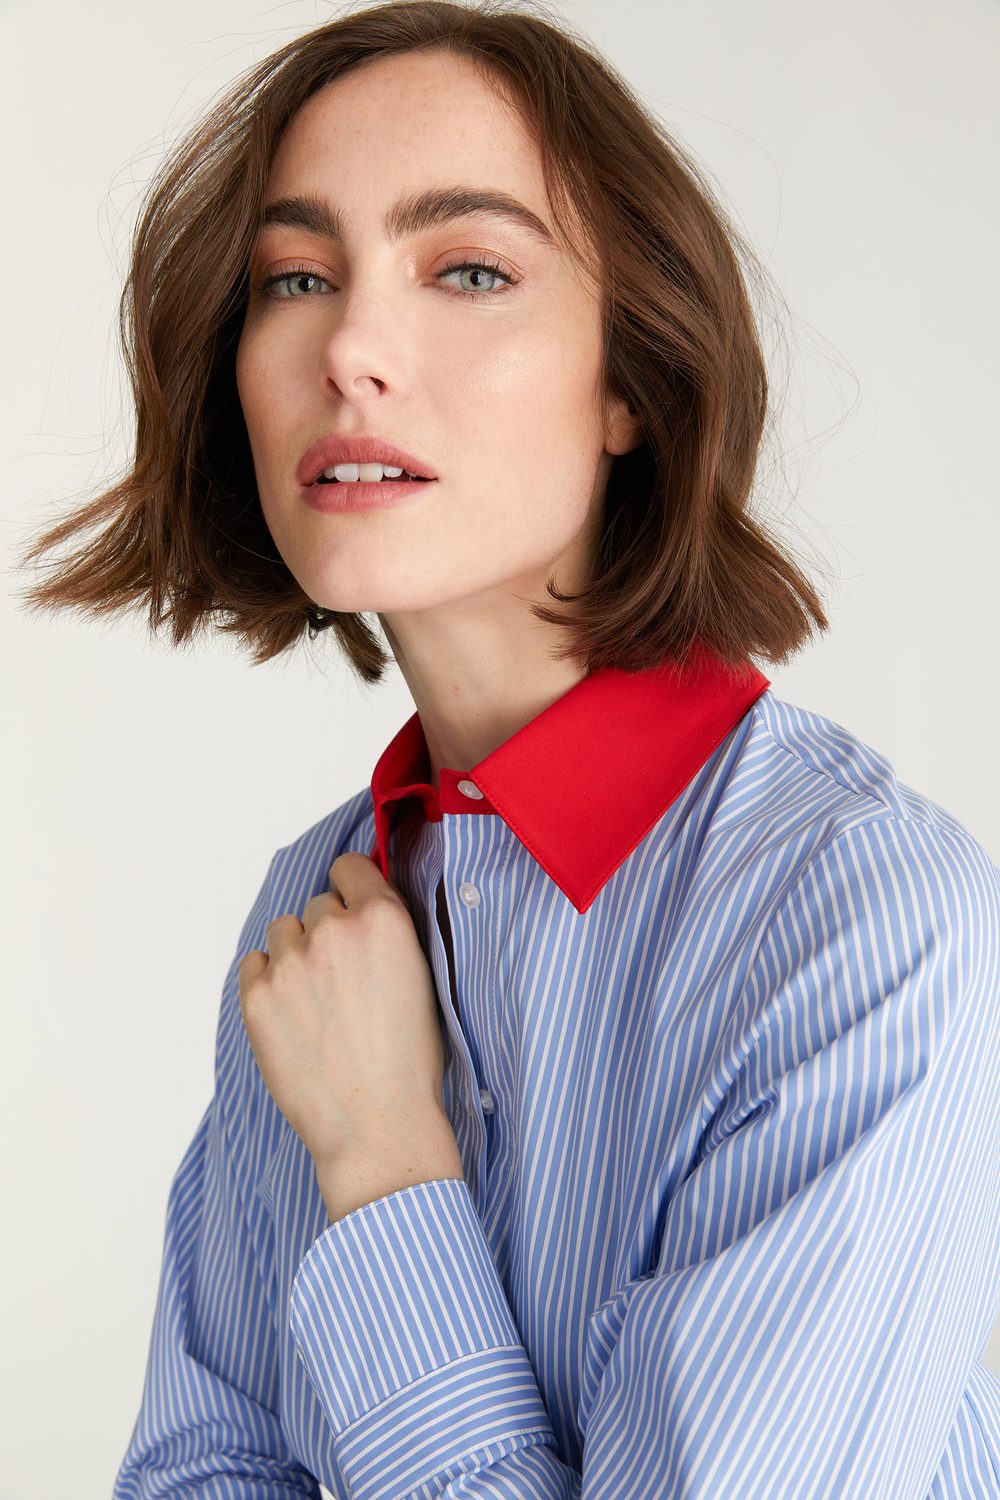 Striped Shirt With Contrast Collar